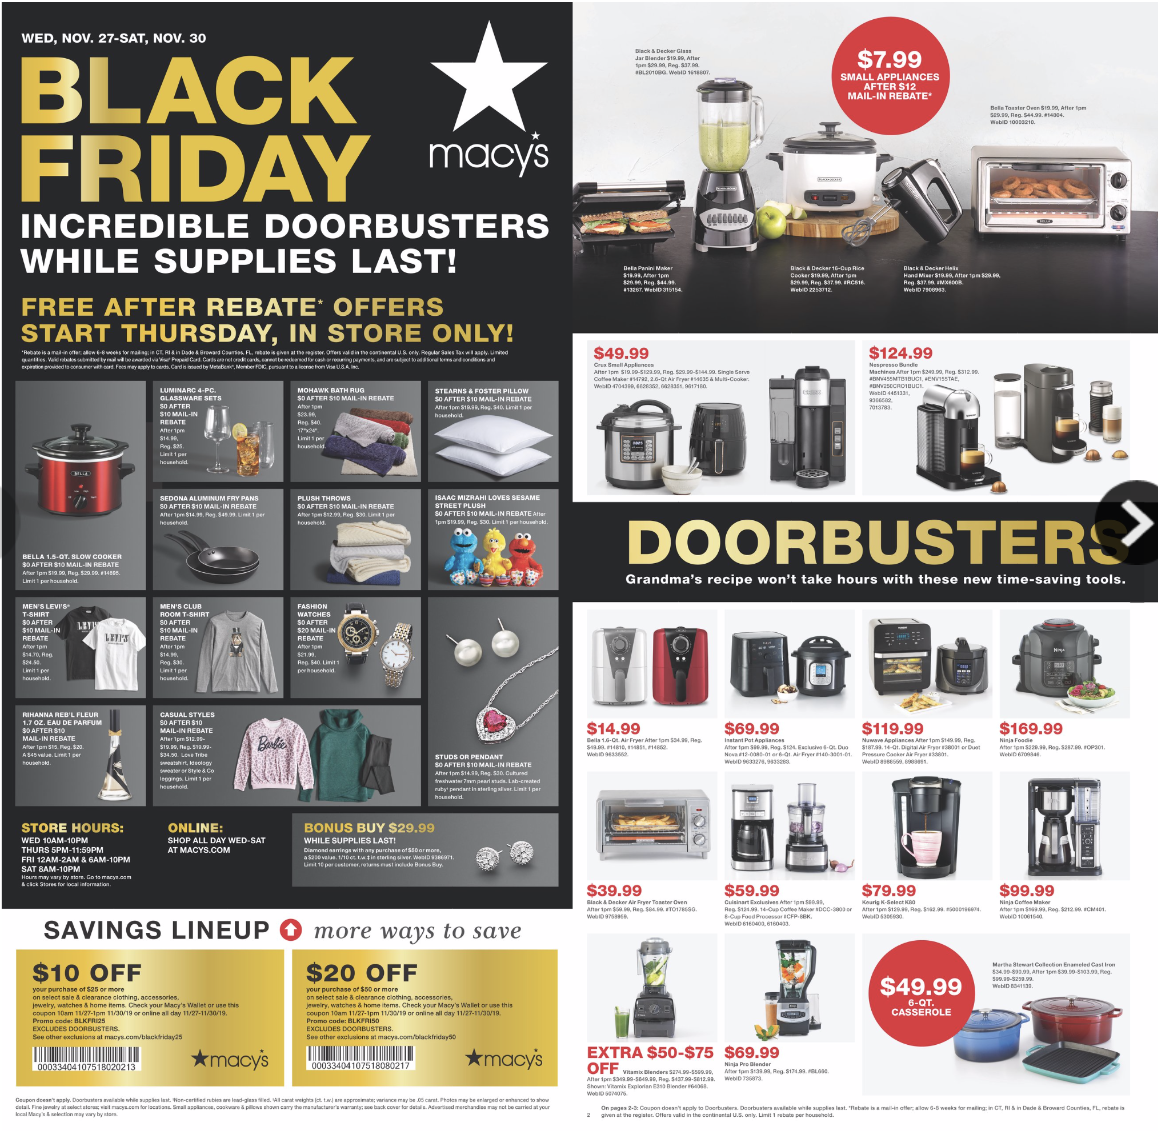 https://9to5toys.com/wp-content/uploads/sites/5/2019/11/black-friday-ad-1.png